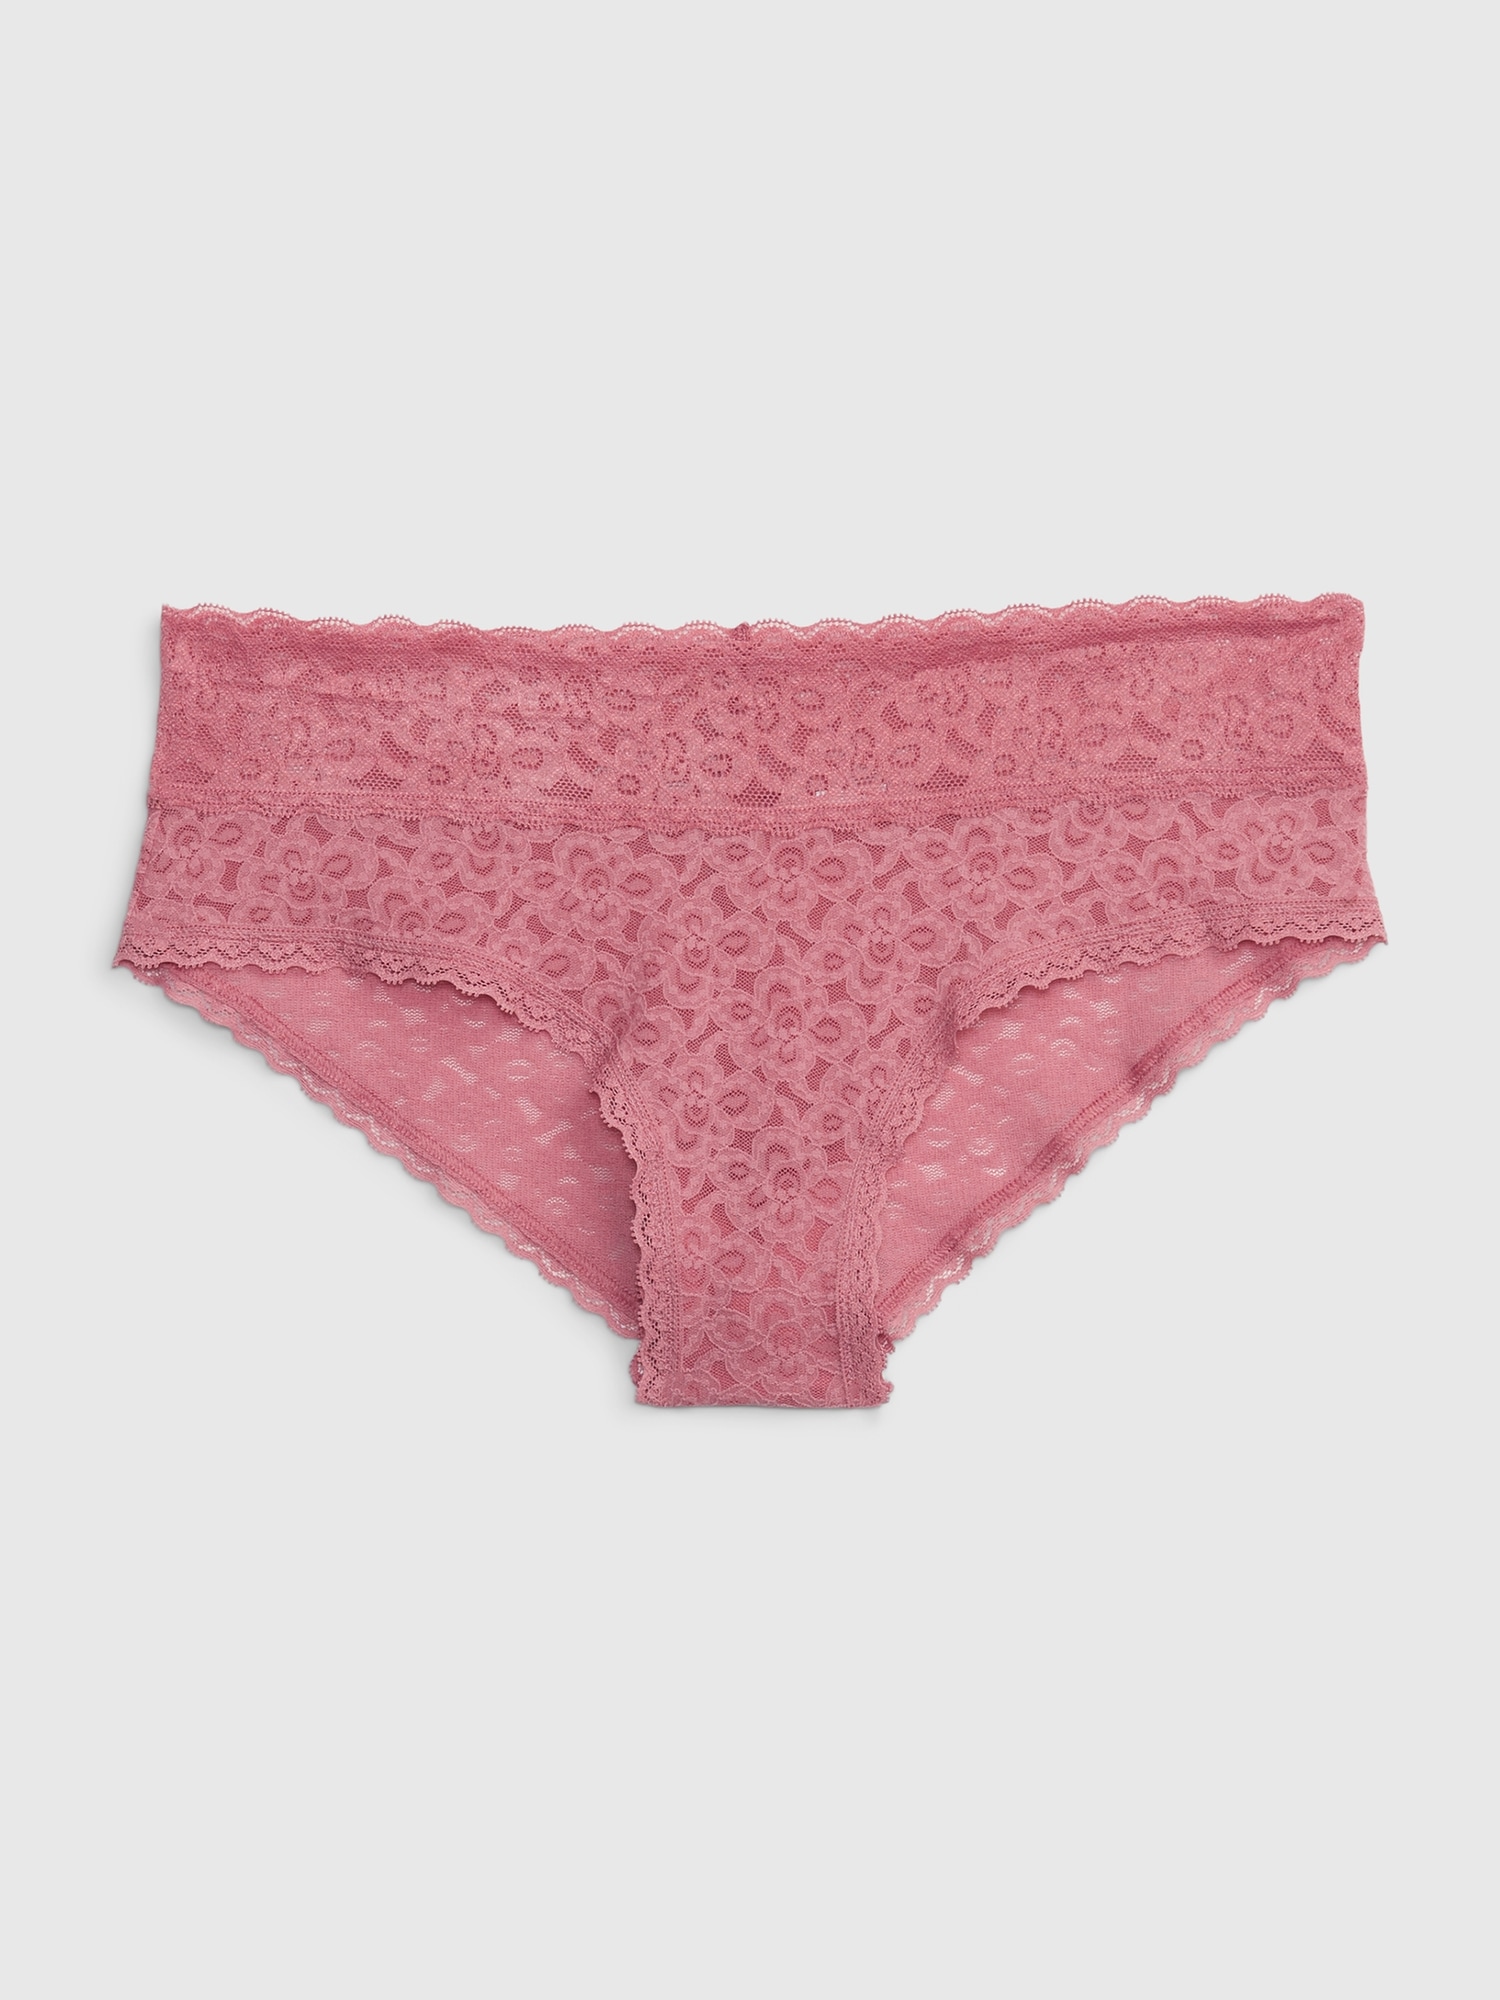 Gap Lace Cheeky Underwear are on sale at .